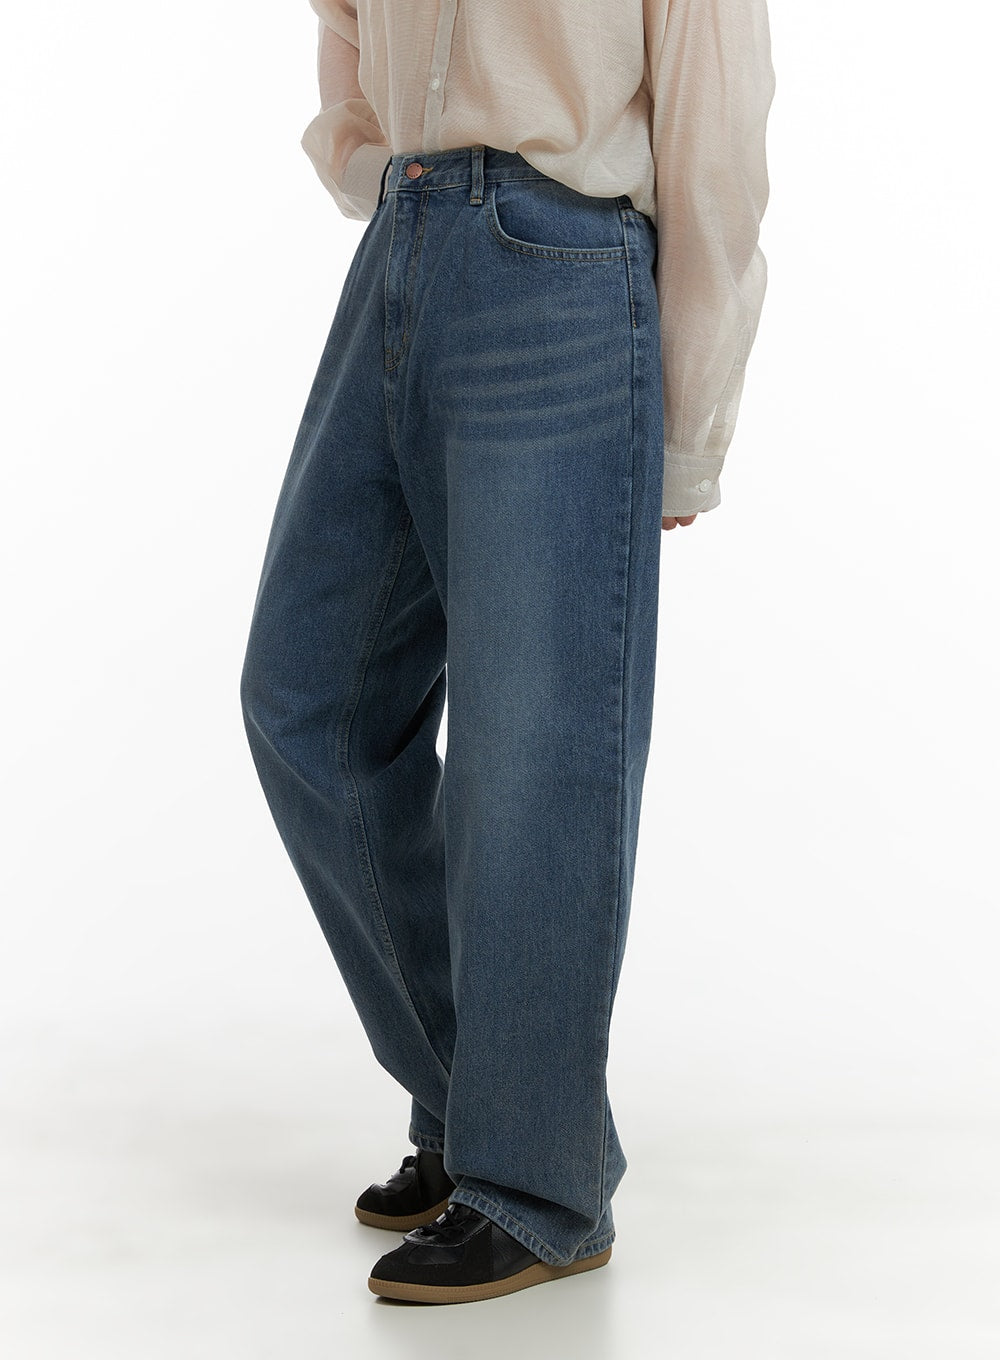 mens-washed-denim-wide-fit-jeans-ia402